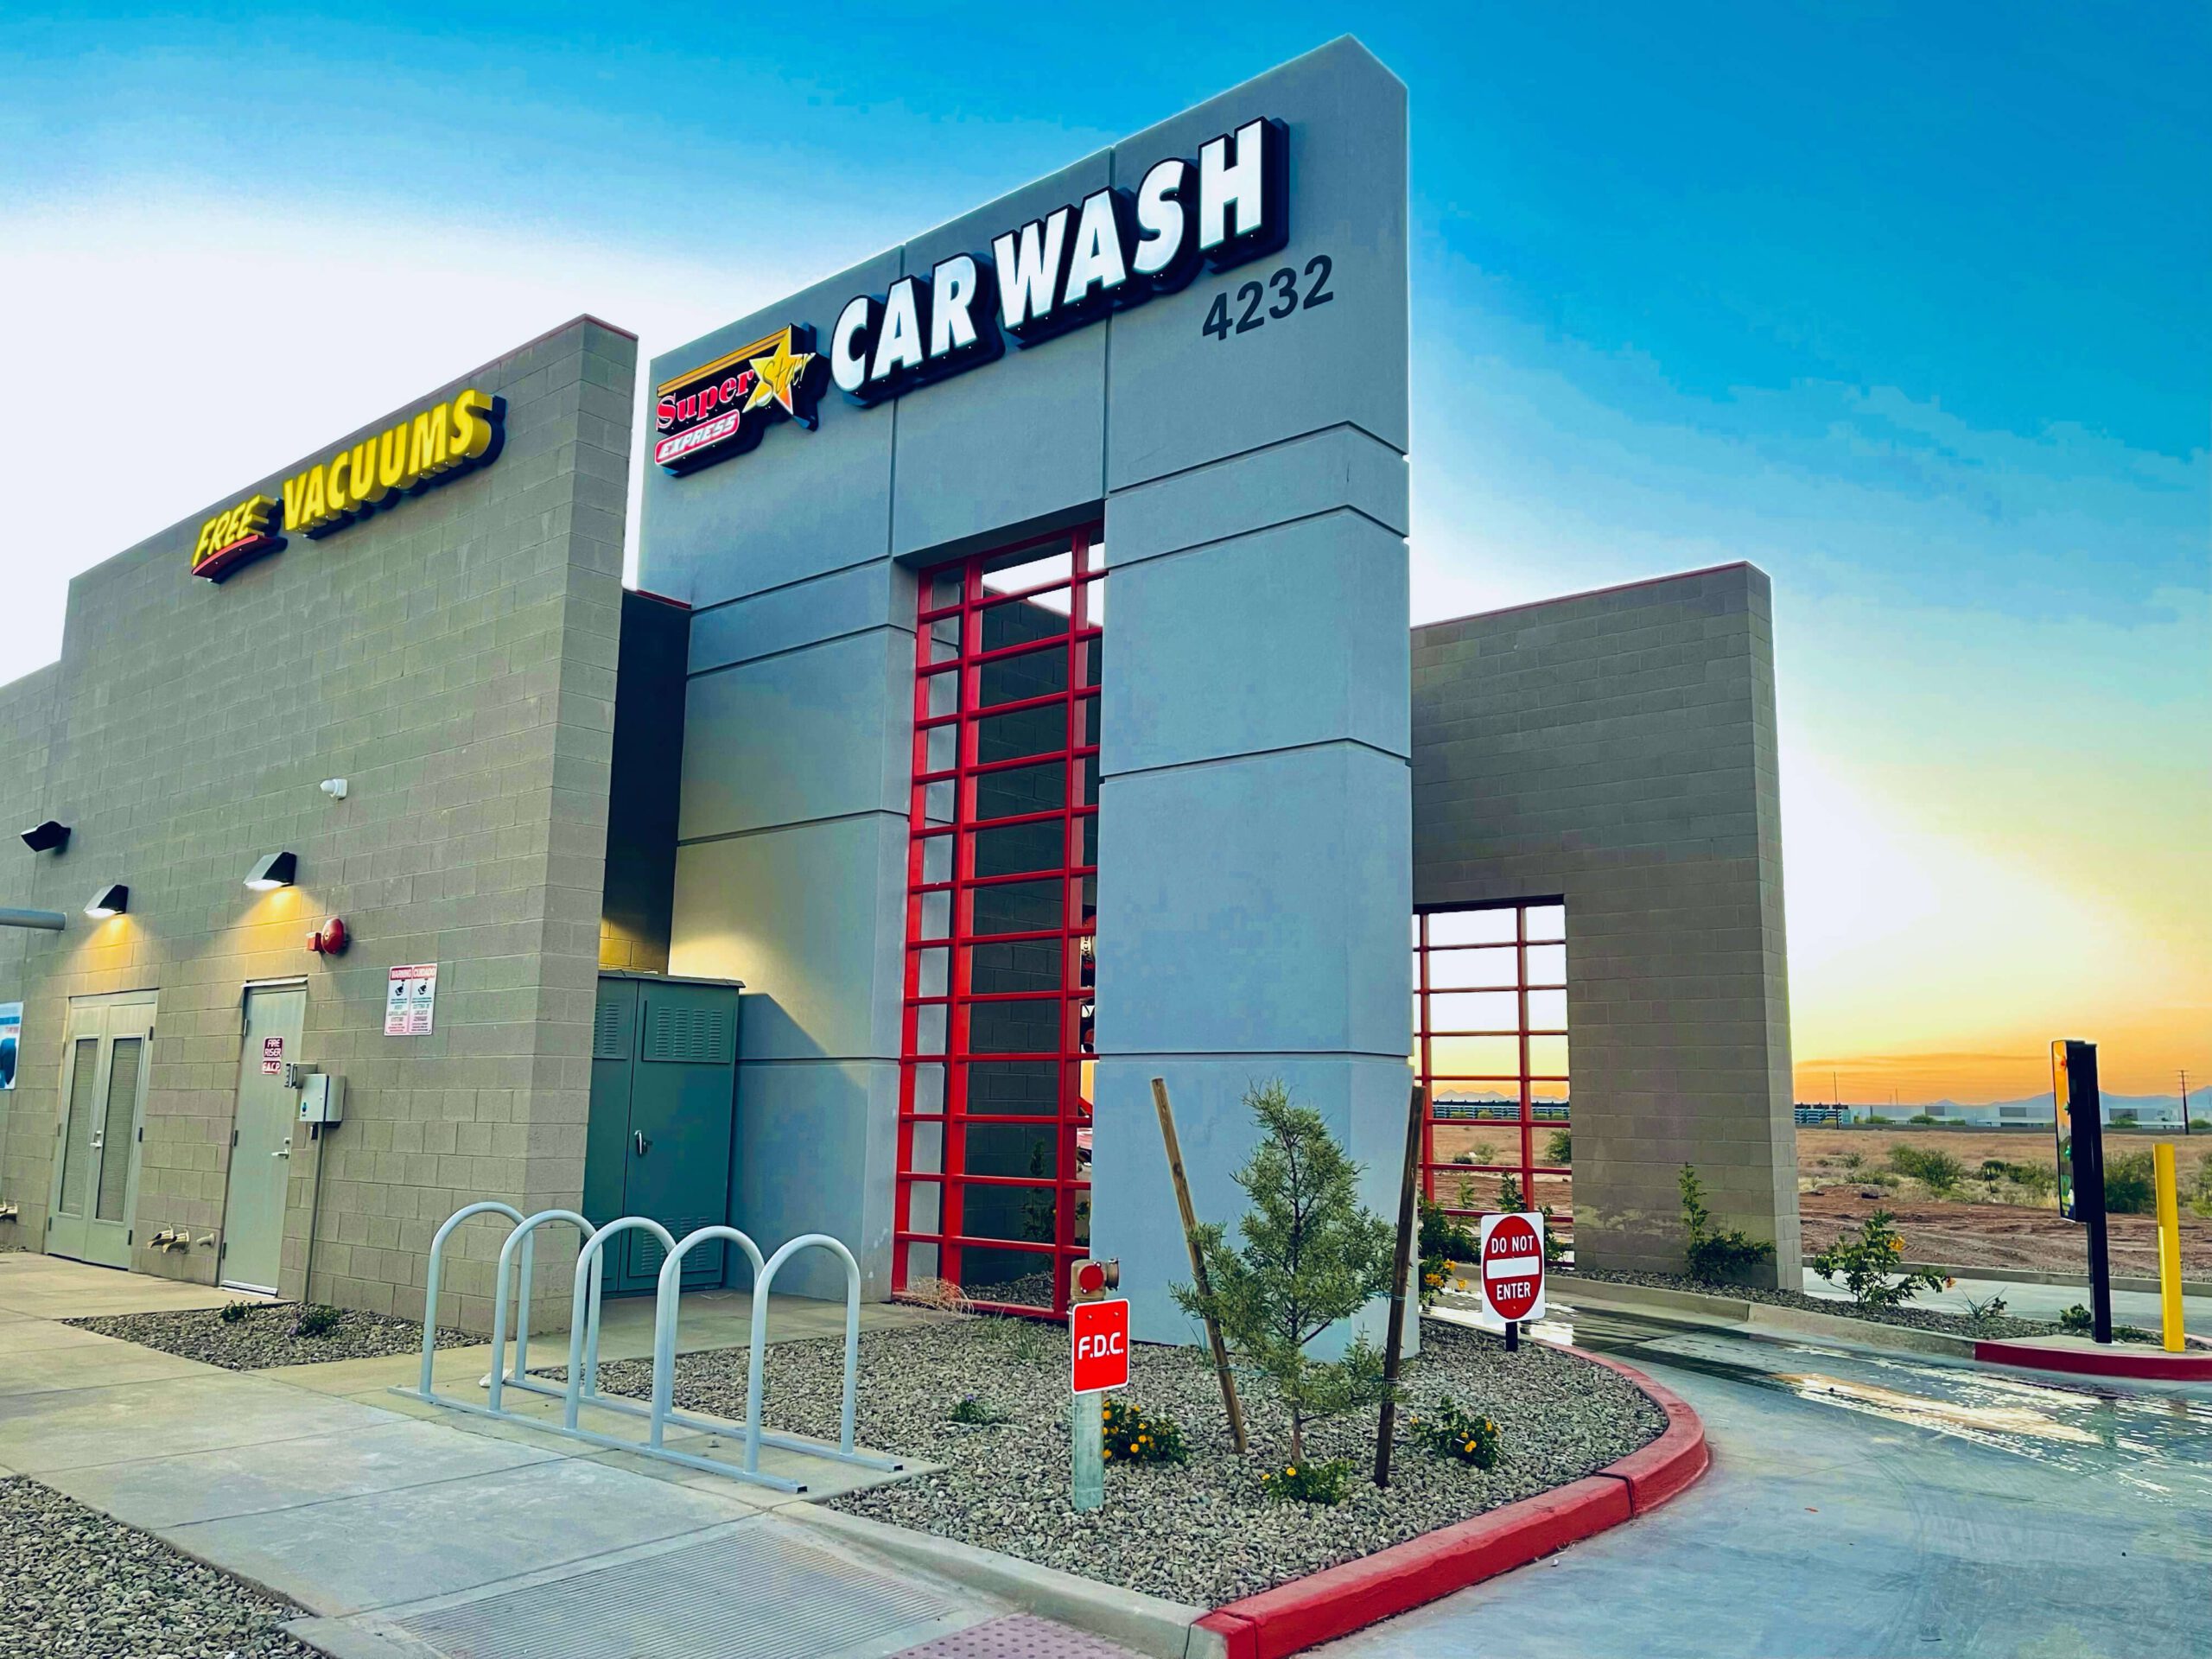 Super Star Car Wash to be discussed at CG planning and zoning